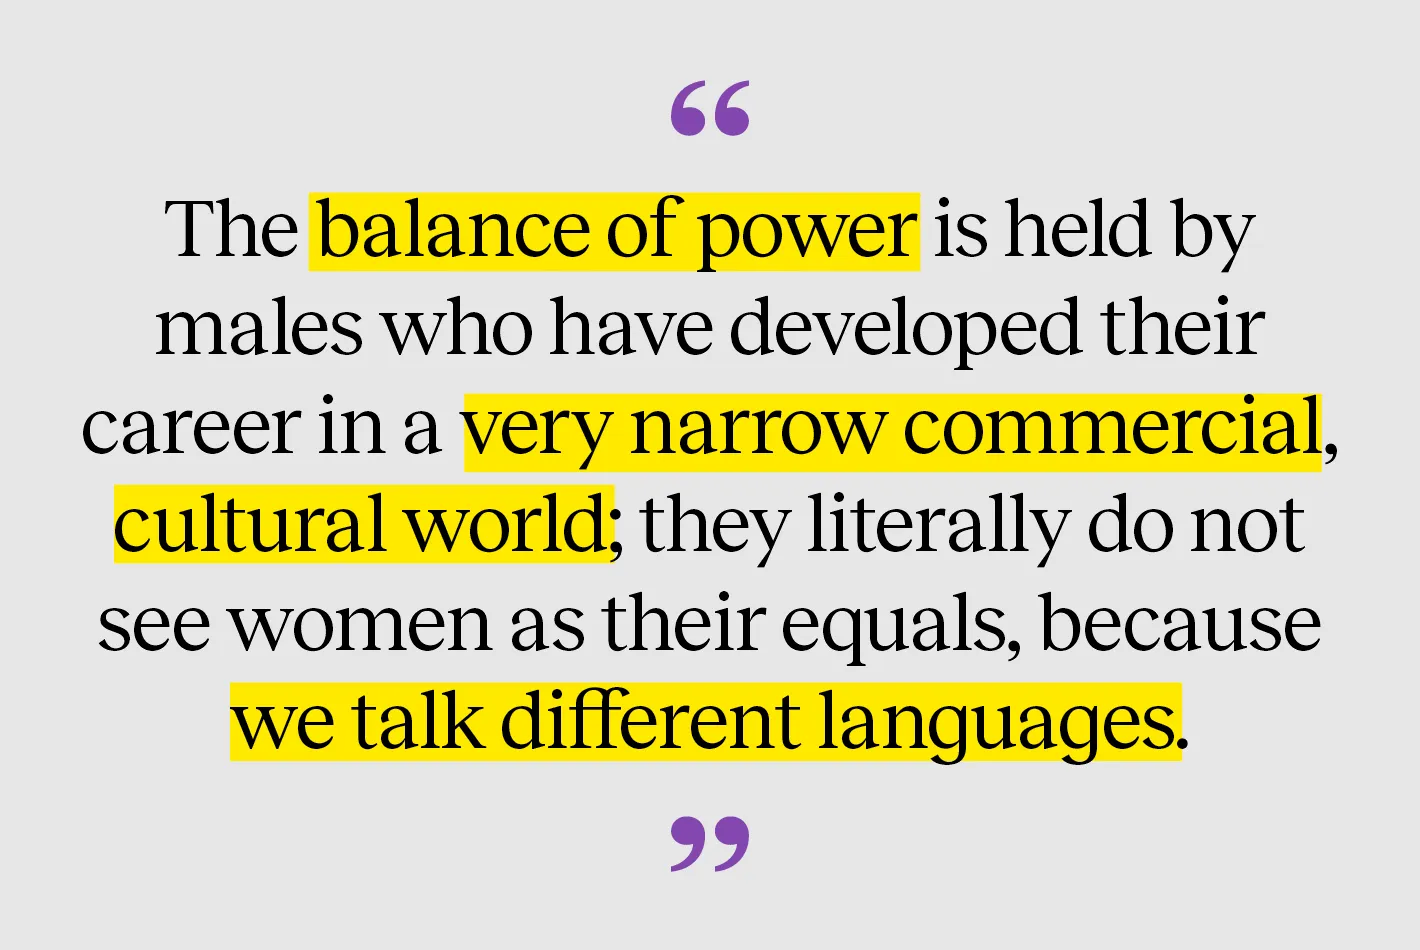 The balance of power is held by males who have developed their career in a very narrow commercial, cultural world; they literally do not see women as their equals, because we talk different languages.